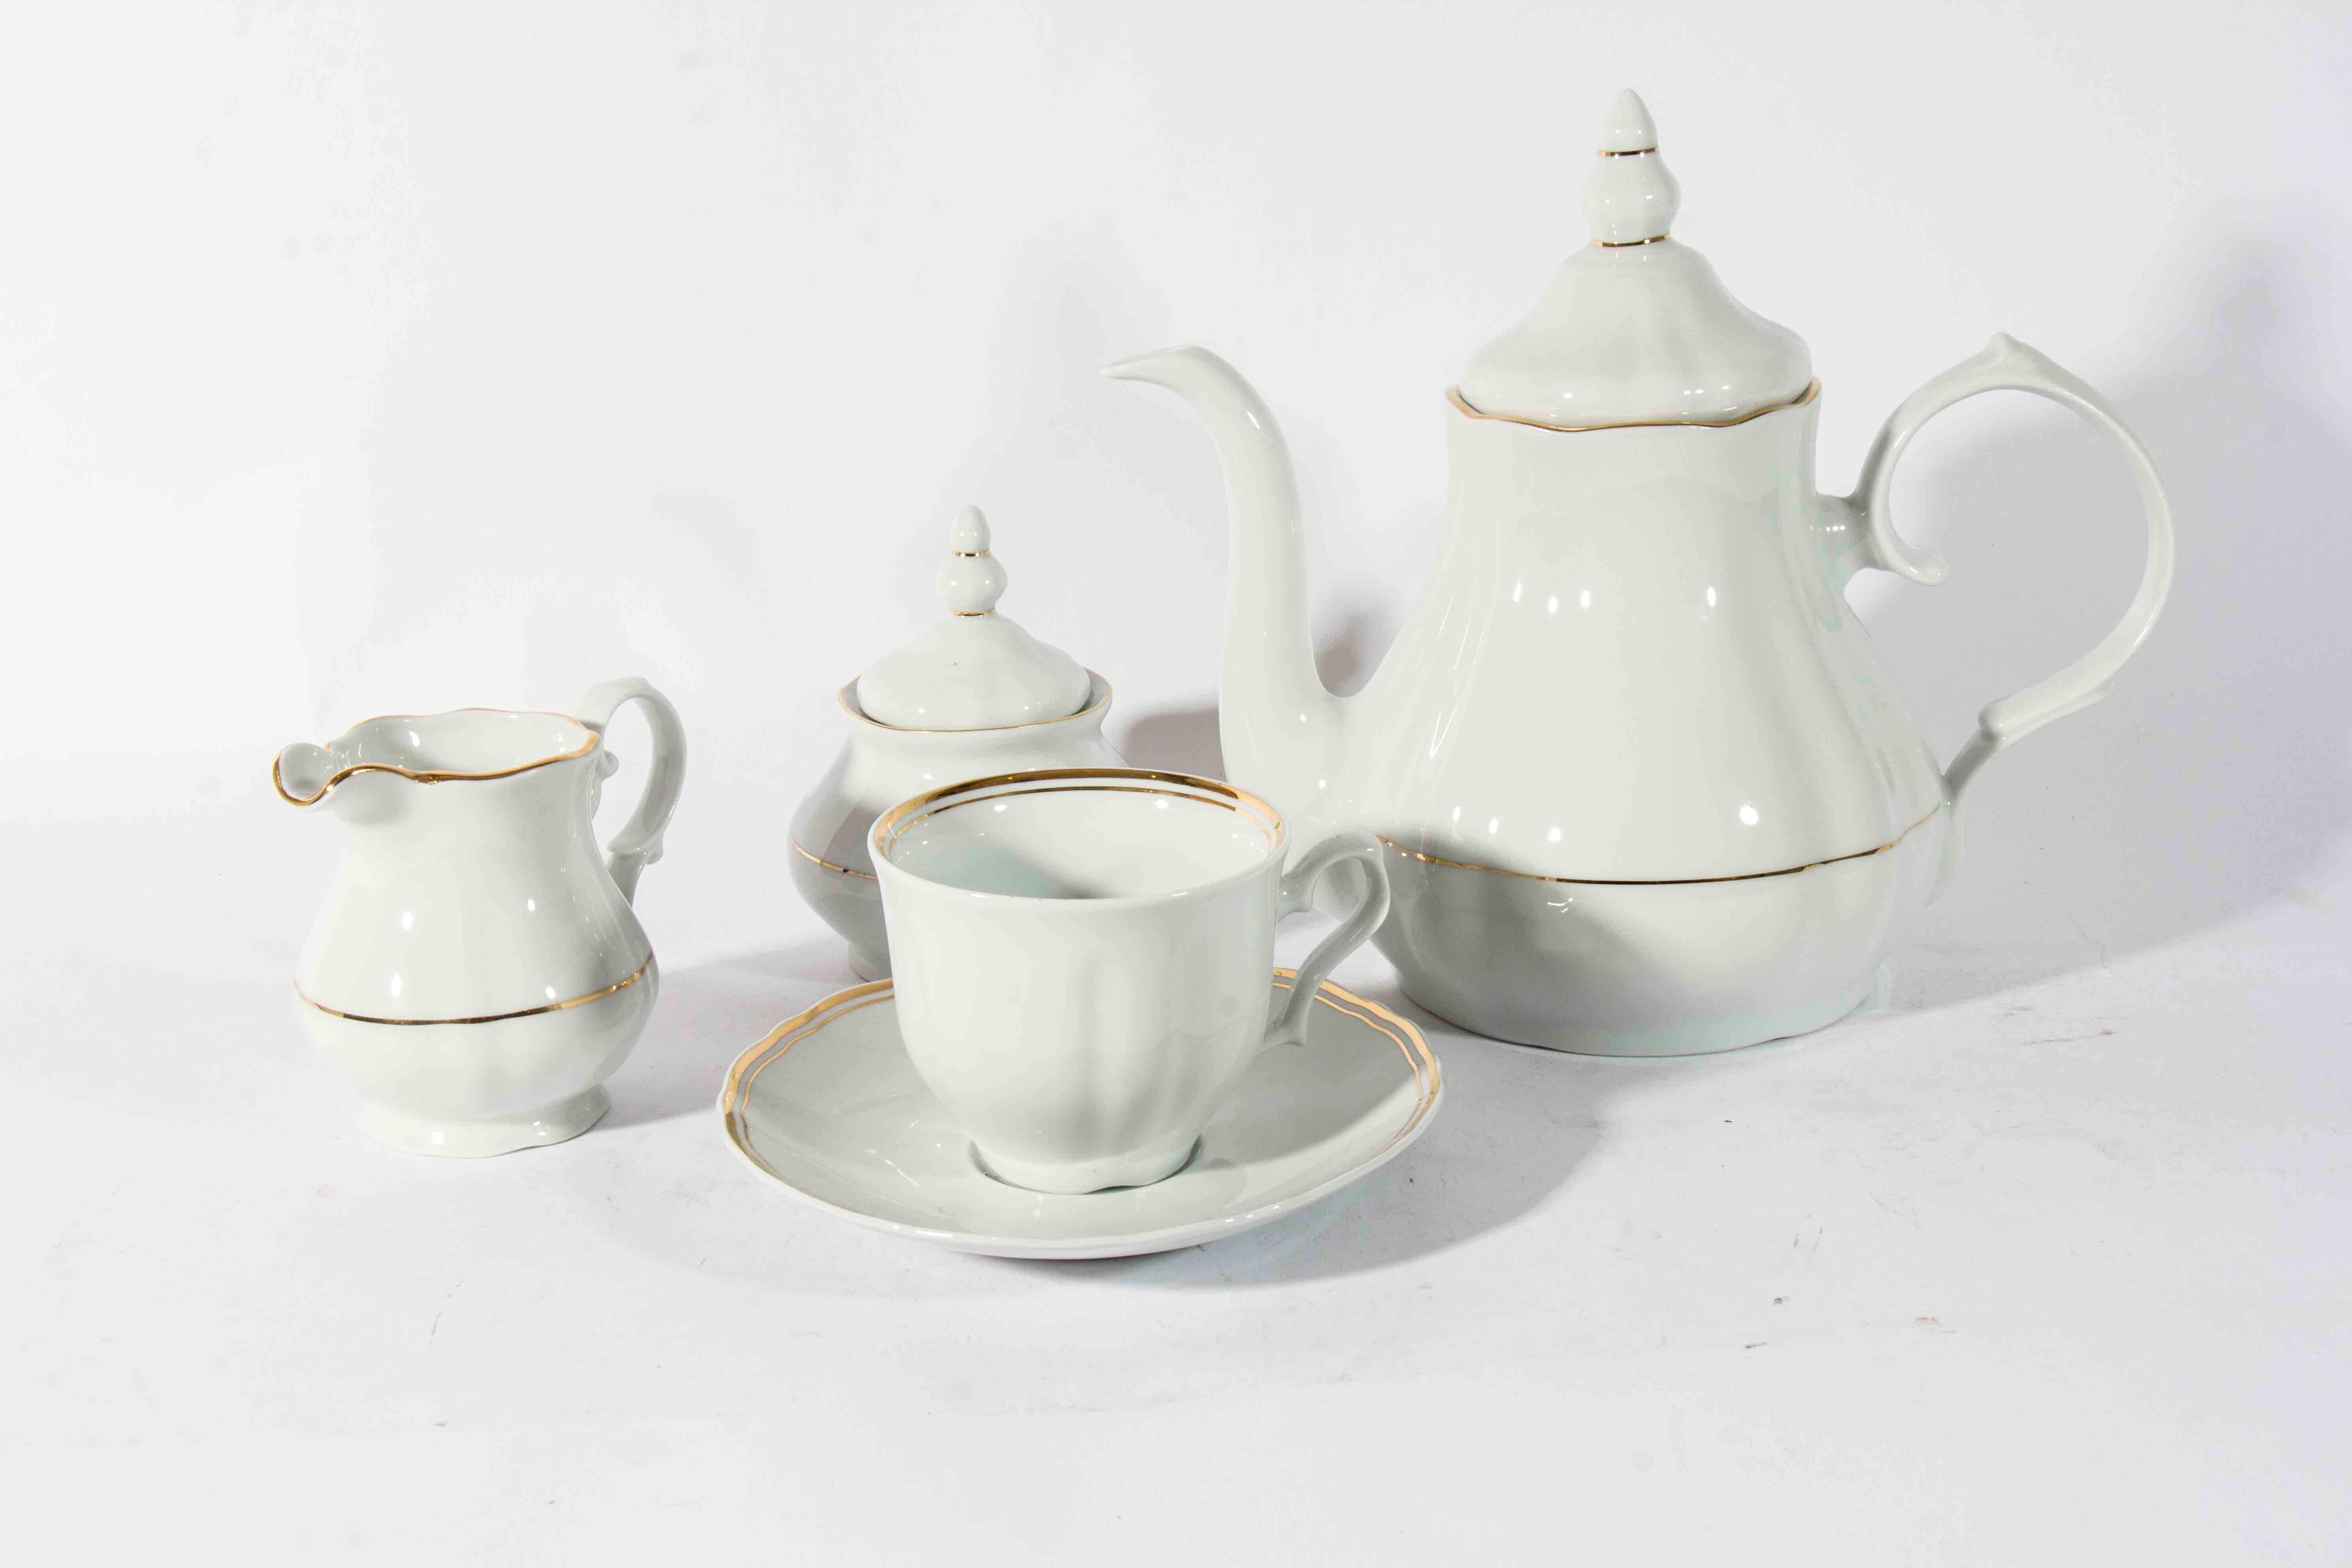 Vintage white porcelain with 24-karat gold trim coffee or tea service for six people. Excellent condition. The tea or coffee pot measure 8 inches high x 9 inches diameter. 17 pieces set.